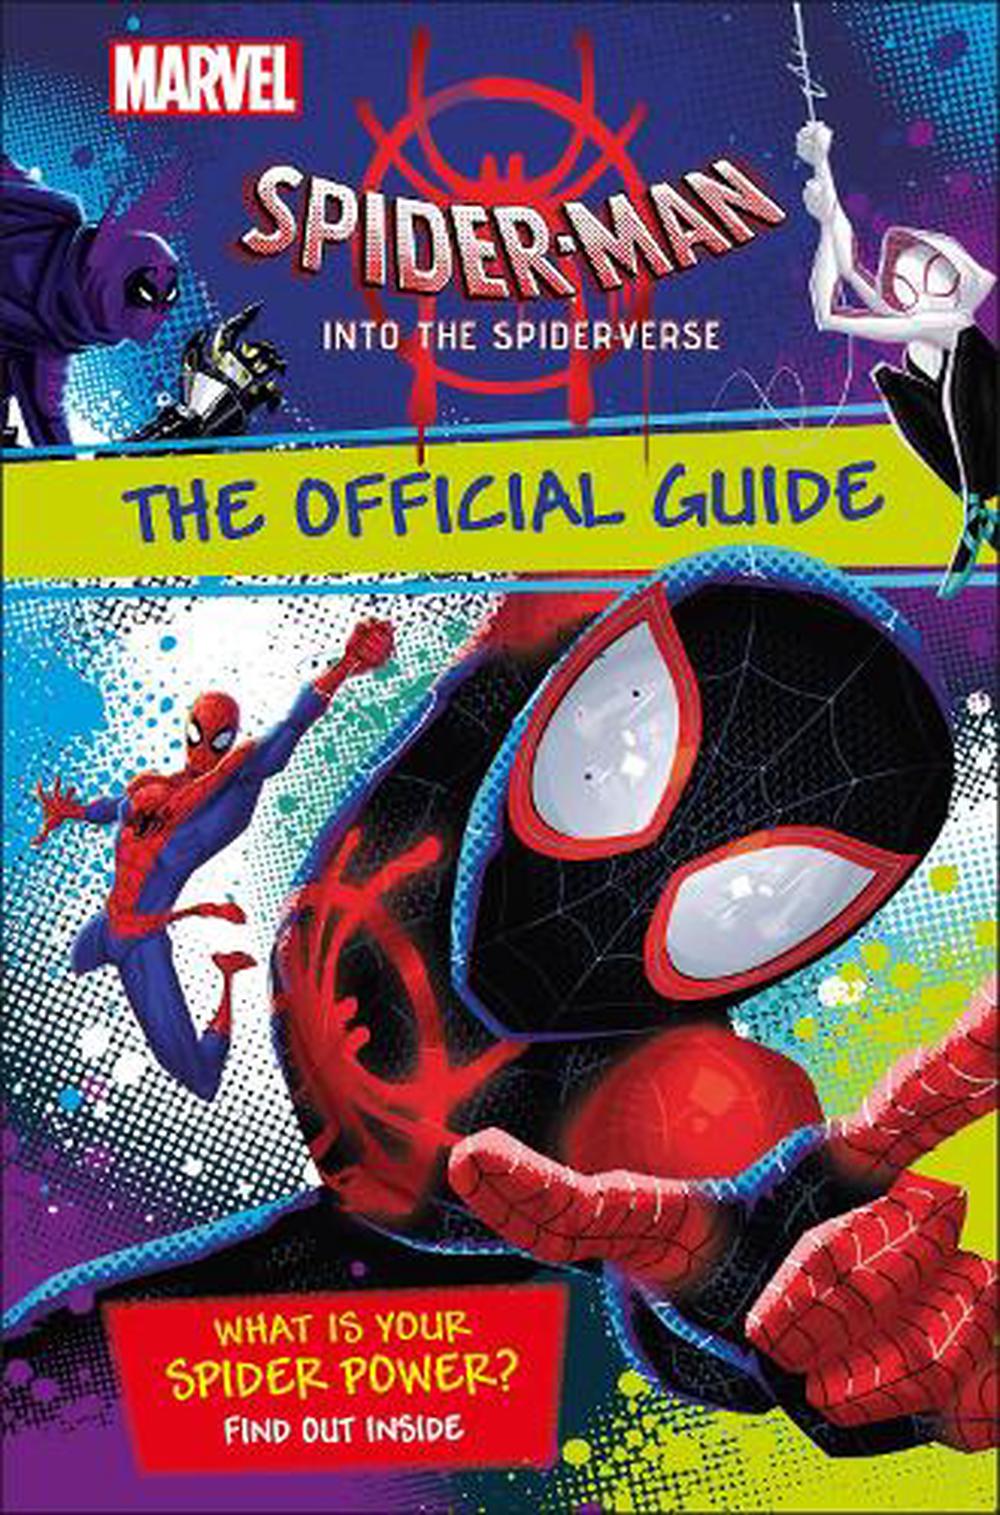 Marvel Spider-Man Into the Spider-Verse The Official Guide by Shari